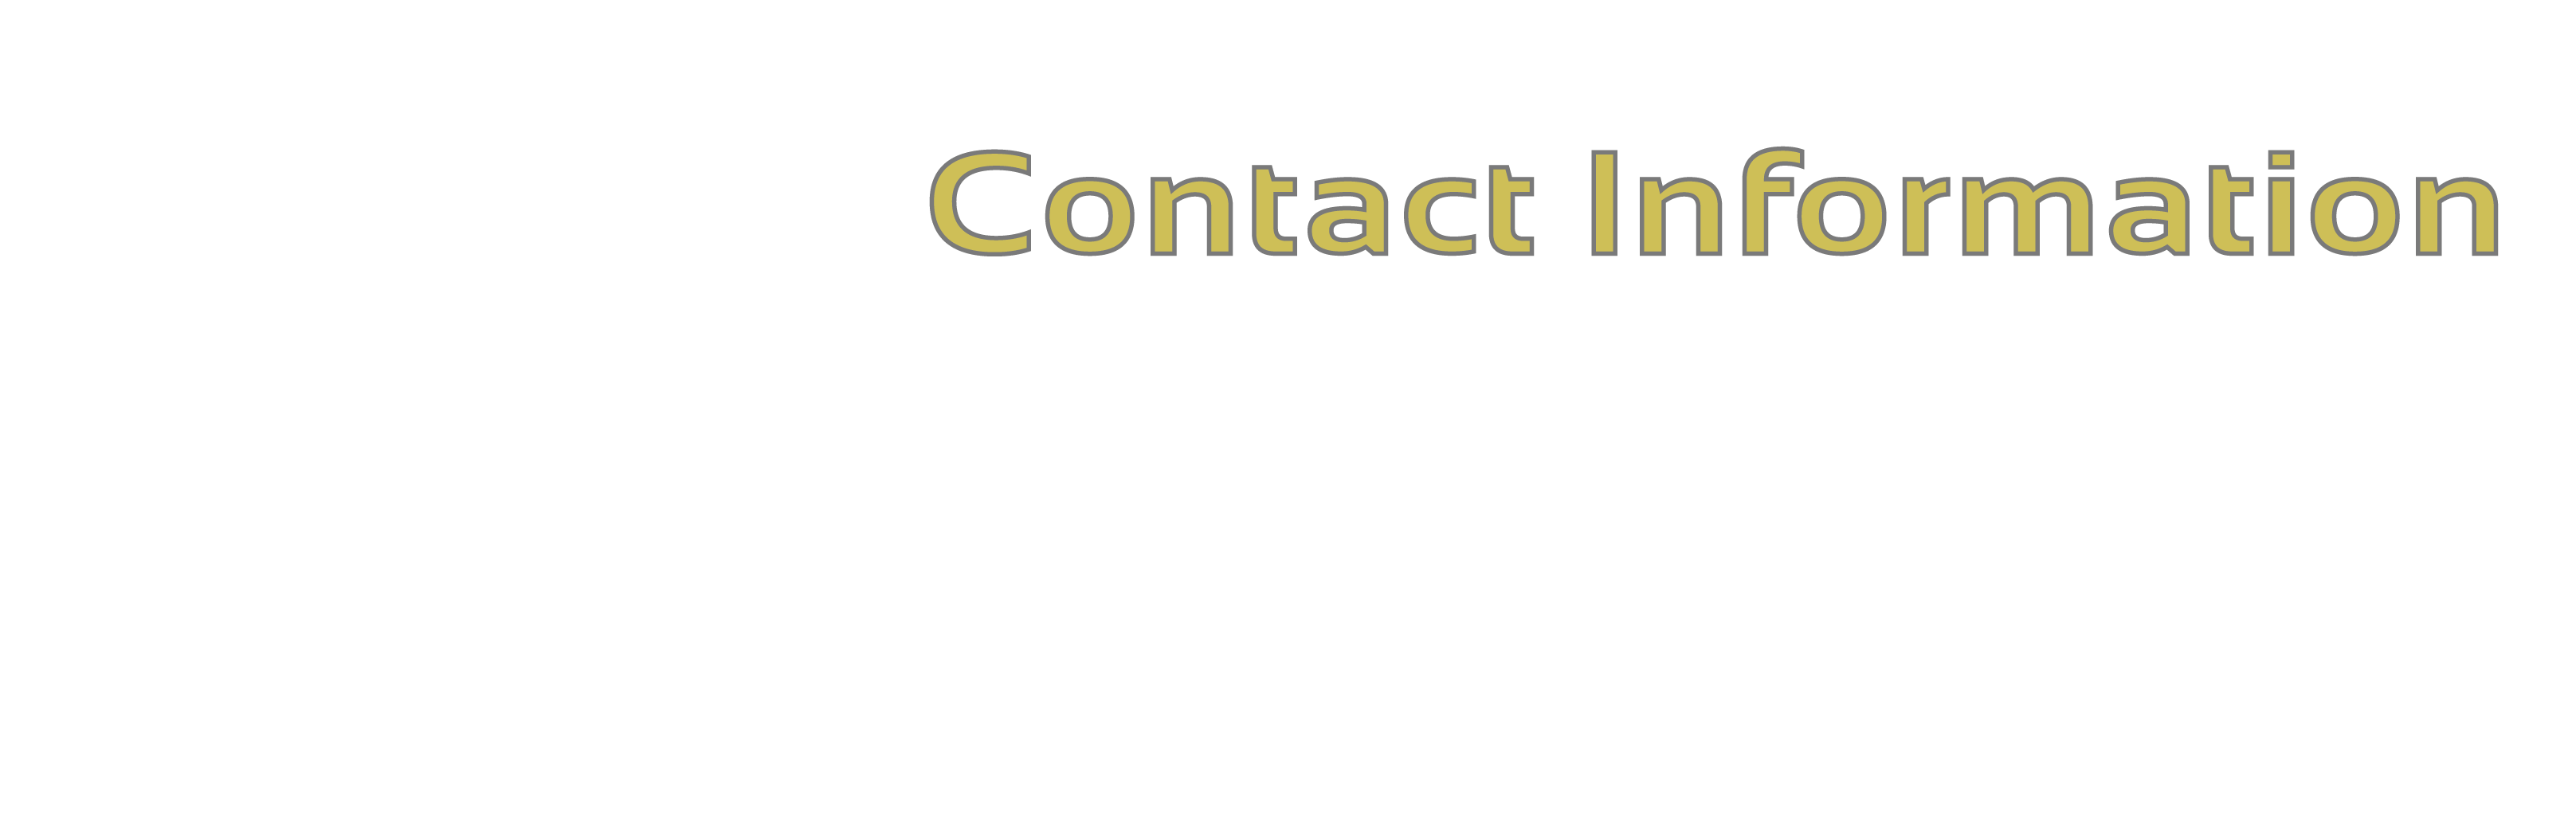 Contact Information. Donna Cheswick. 724-493-9695. donna@cheswickdivorcesolutions.com